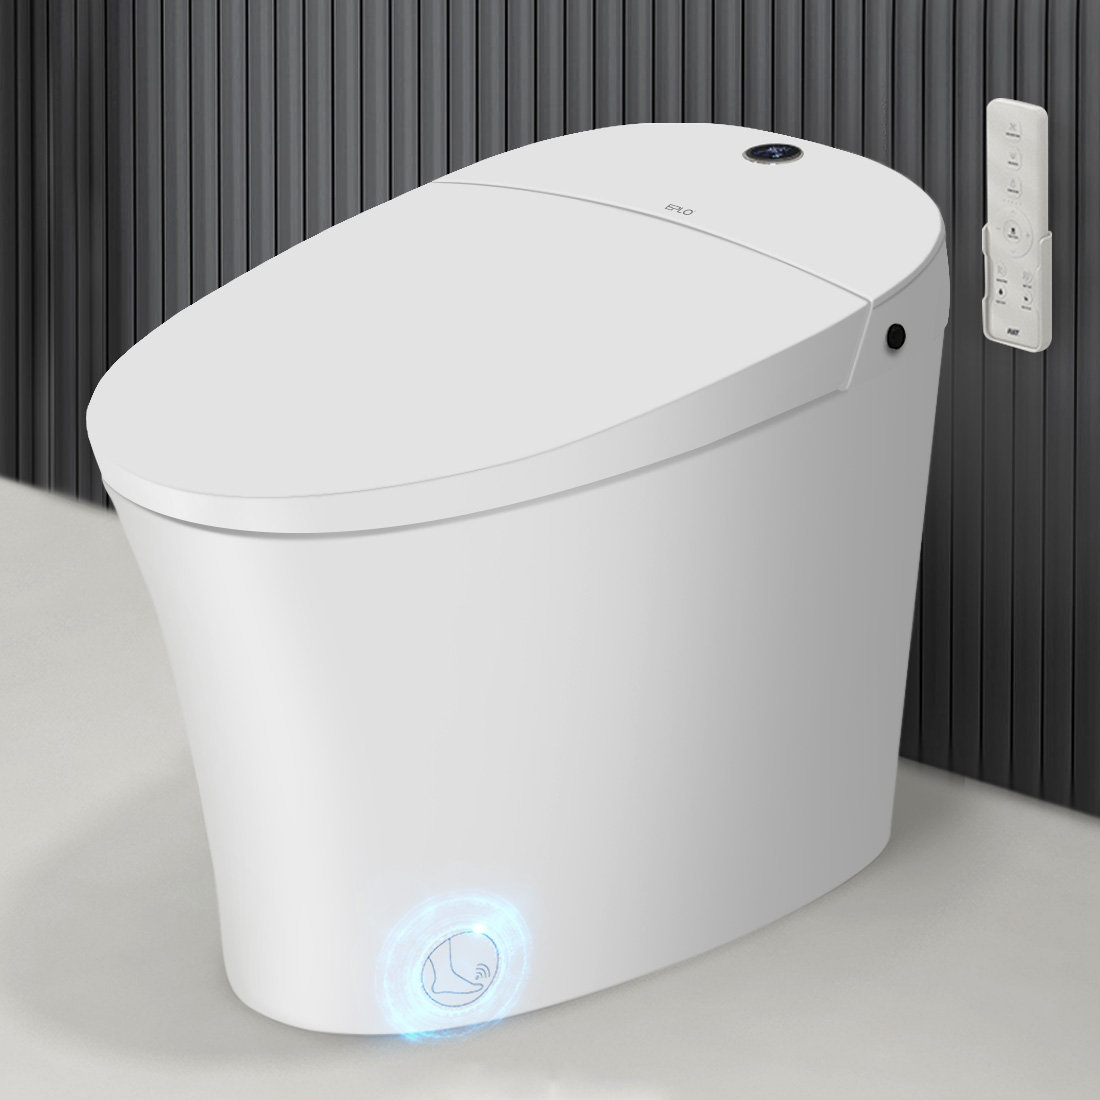 HOROW Calla Smart Bidet Toilet, Elongated Heated Seat with Instant Warm  Water, Night Light, Auto Flush & Reviews